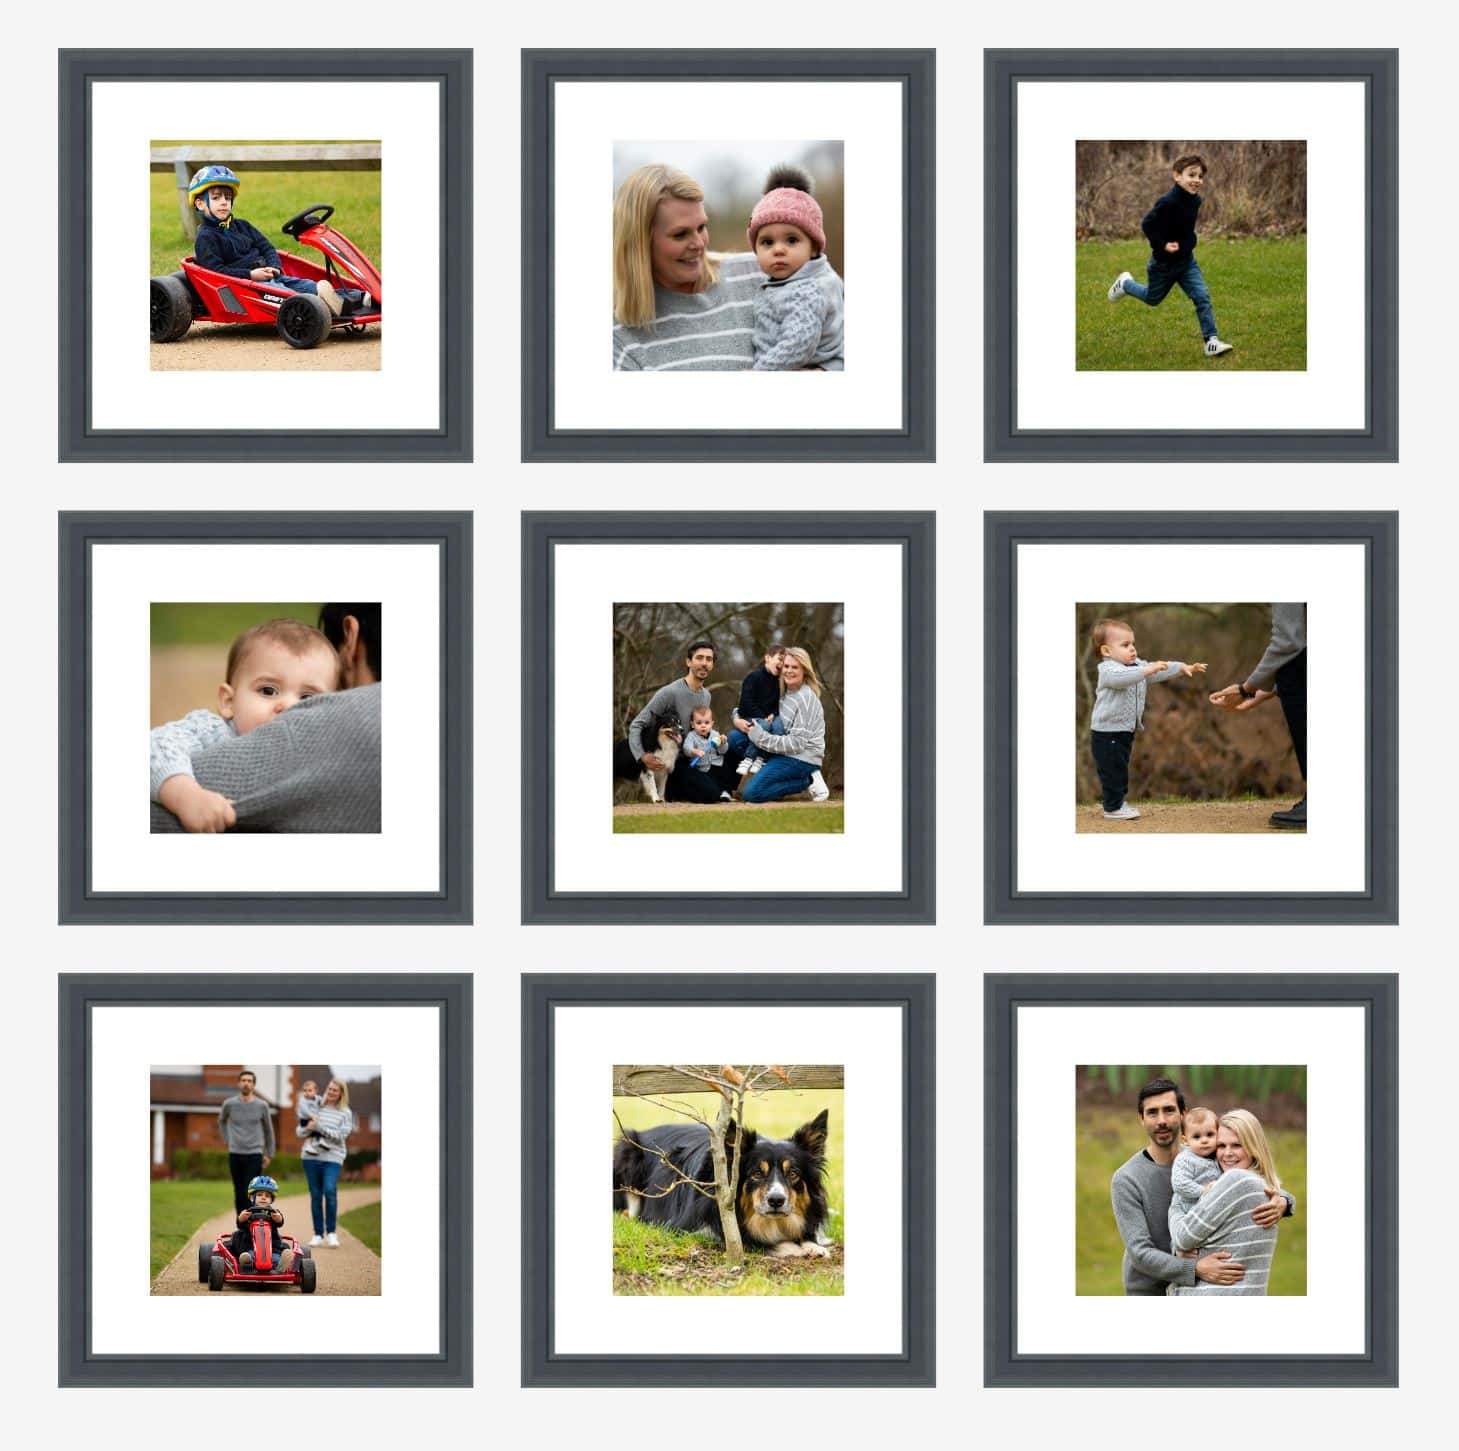 9 FRAME PHOTOCOLLECTION WITH OUTDOOR PHOTO SESSION